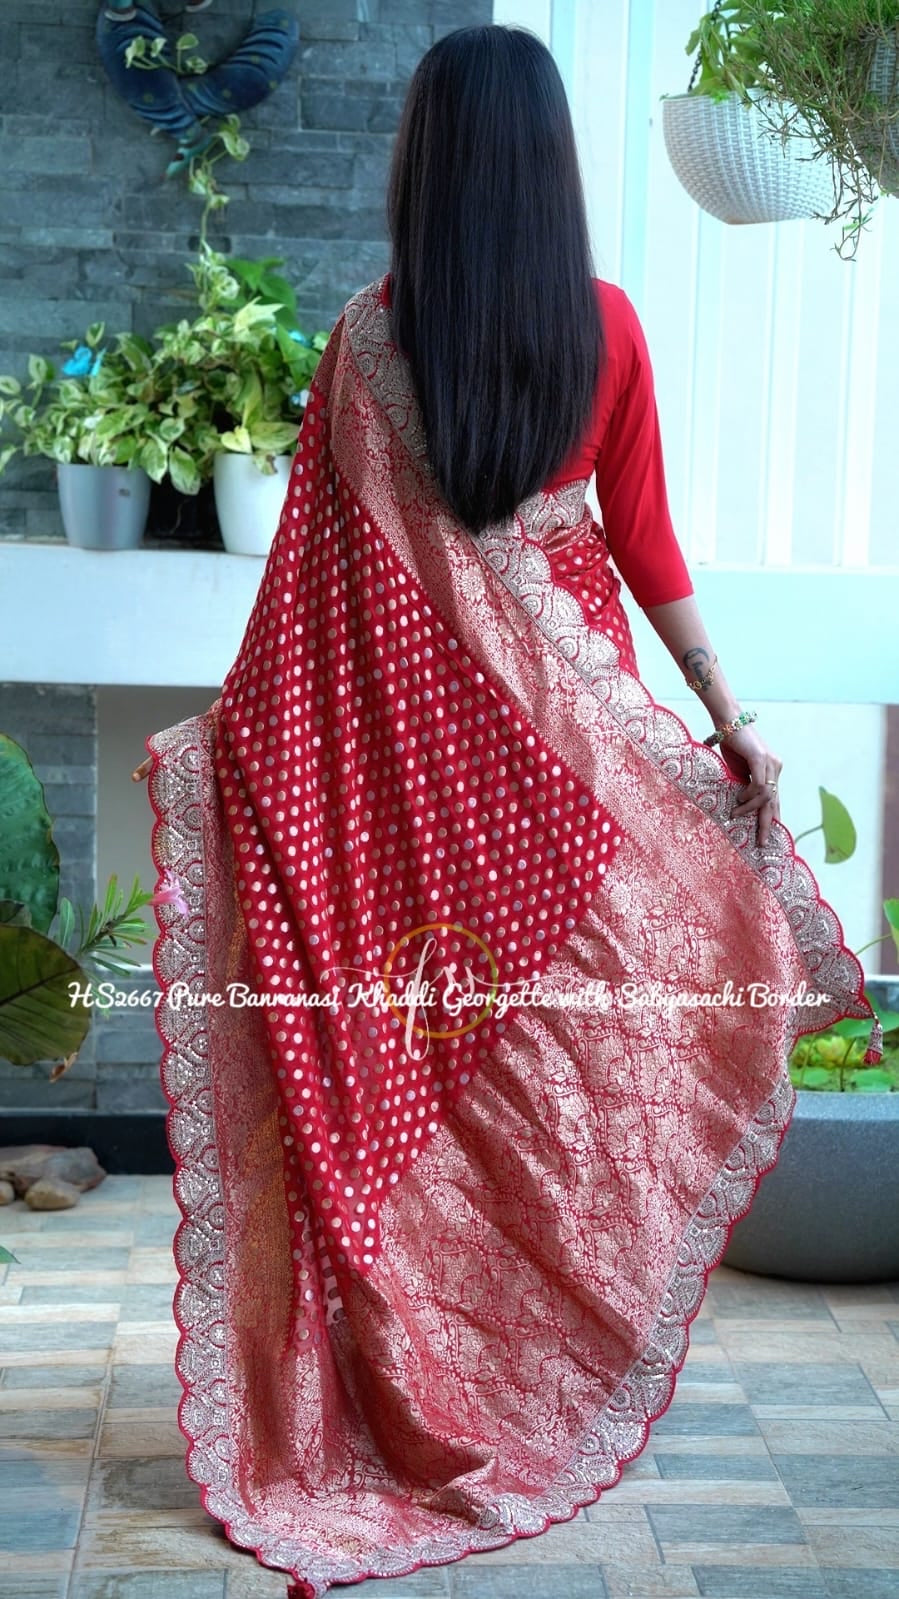 Red hot khaddi gorgette Indian traditional sarees